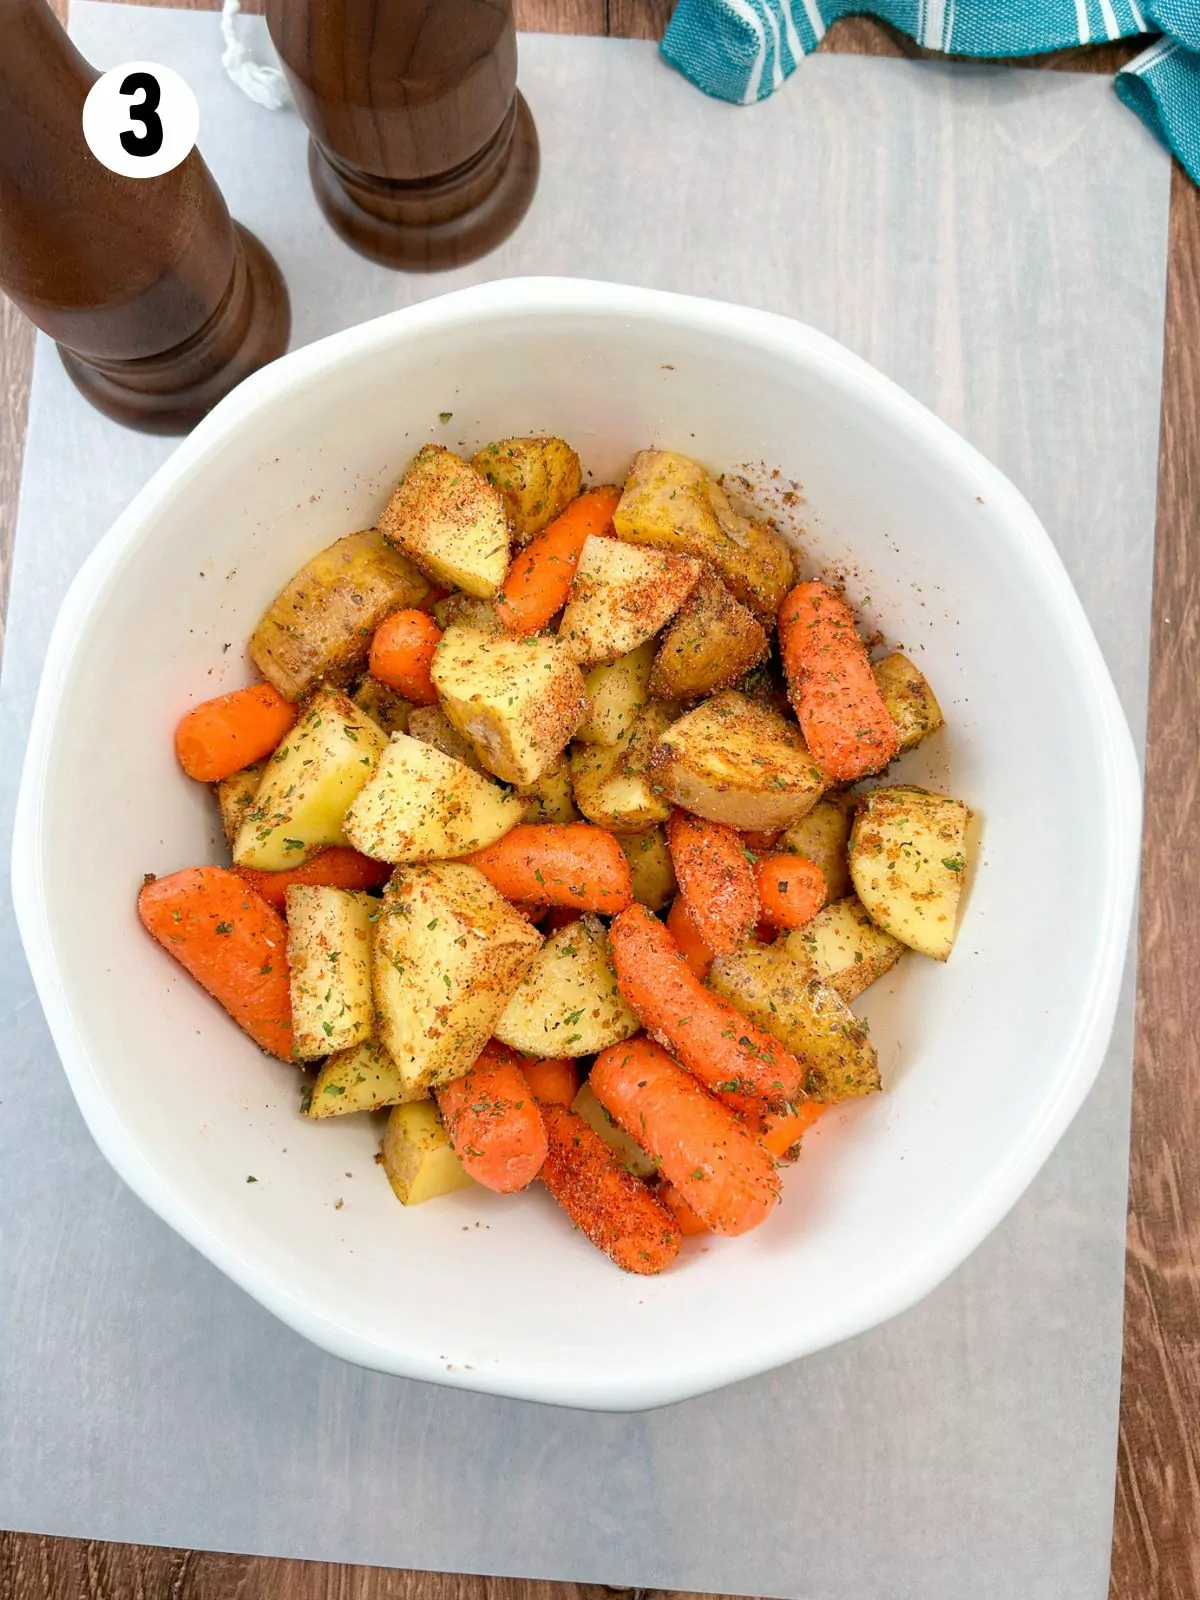 seasoned potatoes and carrots in white bowl.